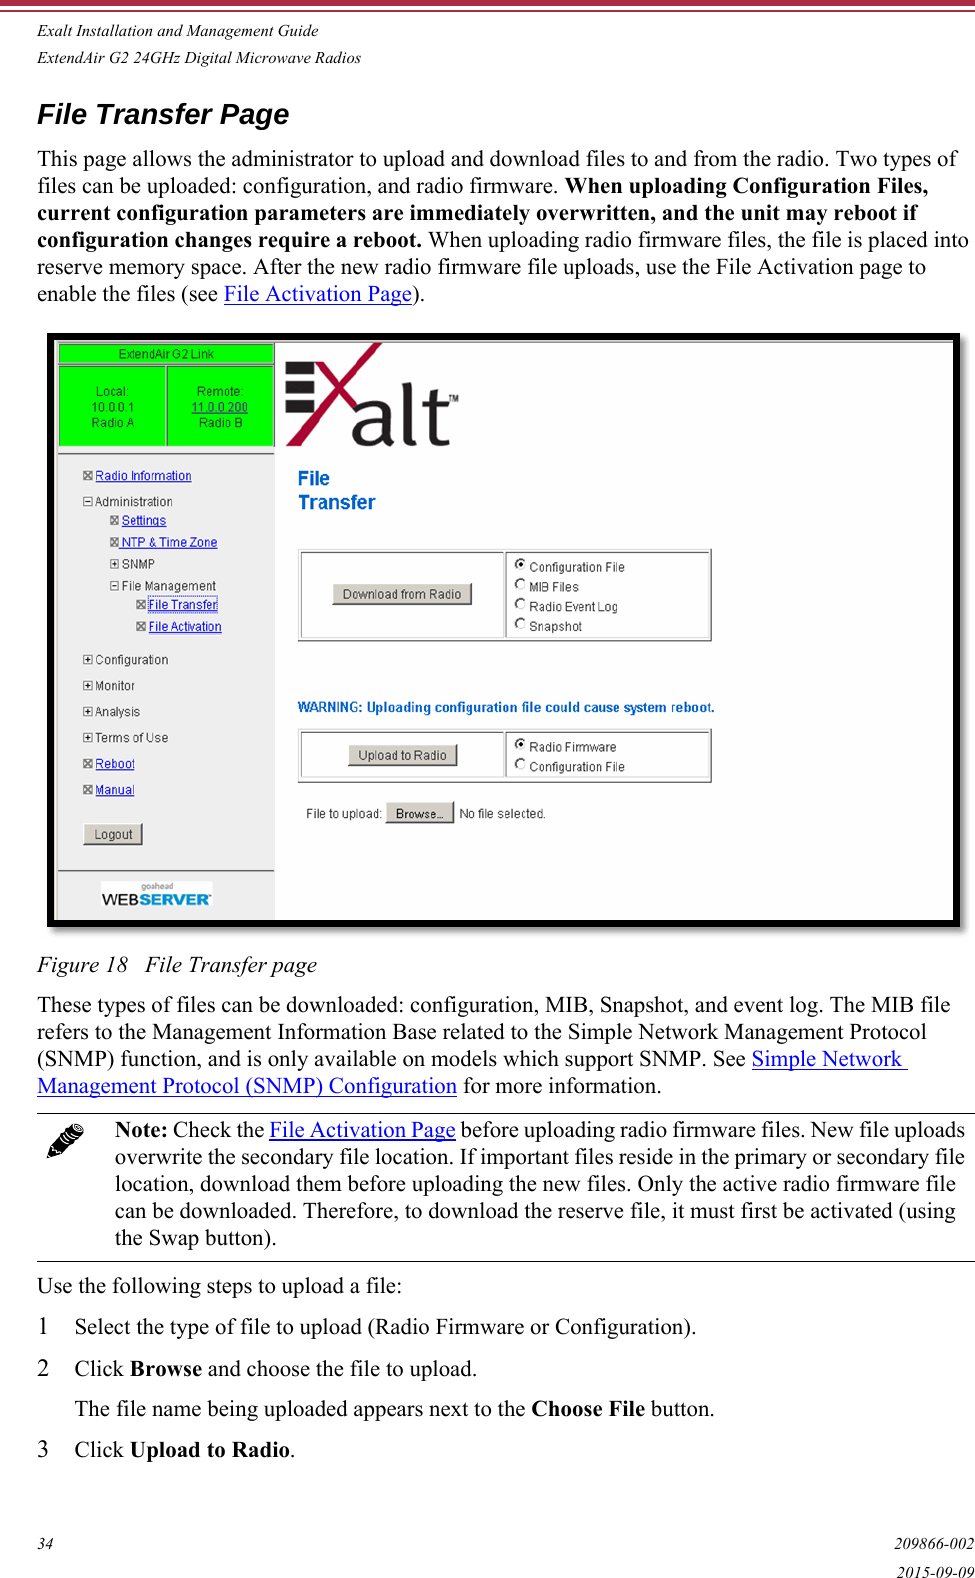 Exalt Installation and Management GuideExtendAir G2 24GHz Digital Microwave Radios34 209866-0022015-09-09File Transfer PageThis page allows the administrator to upload and download files to and from the radio. Two types of files can be uploaded: configuration, and radio firmware. When uploading Configuration Files, current configuration parameters are immediately overwritten, and the unit may reboot if configuration changes require a reboot. When uploading radio firmware files, the file is placed into reserve memory space. After the new radio firmware file uploads, use the File Activation page to enable the files (see File Activation Page).Figure 18   File Transfer pageThese types of files can be downloaded: configuration, MIB, Snapshot, and event log. The MIB file refers to the Management Information Base related to the Simple Network Management Protocol (SNMP) function, and is only available on models which support SNMP. See Simple Network Management Protocol (SNMP) Configuration for more information.Use the following steps to upload a file:1Select the type of file to upload (Radio Firmware or Configuration).2Click Browse and choose the file to upload.The file name being uploaded appears next to the Choose File button.3Click Upload to Radio.Note: Check the File Activation Page before uploading radio firmware files. New file uploads overwrite the secondary file location. If important files reside in the primary or secondary file location, download them before uploading the new files. Only the active radio firmware file can be downloaded. Therefore, to download the reserve file, it must first be activated (using the Swap button).